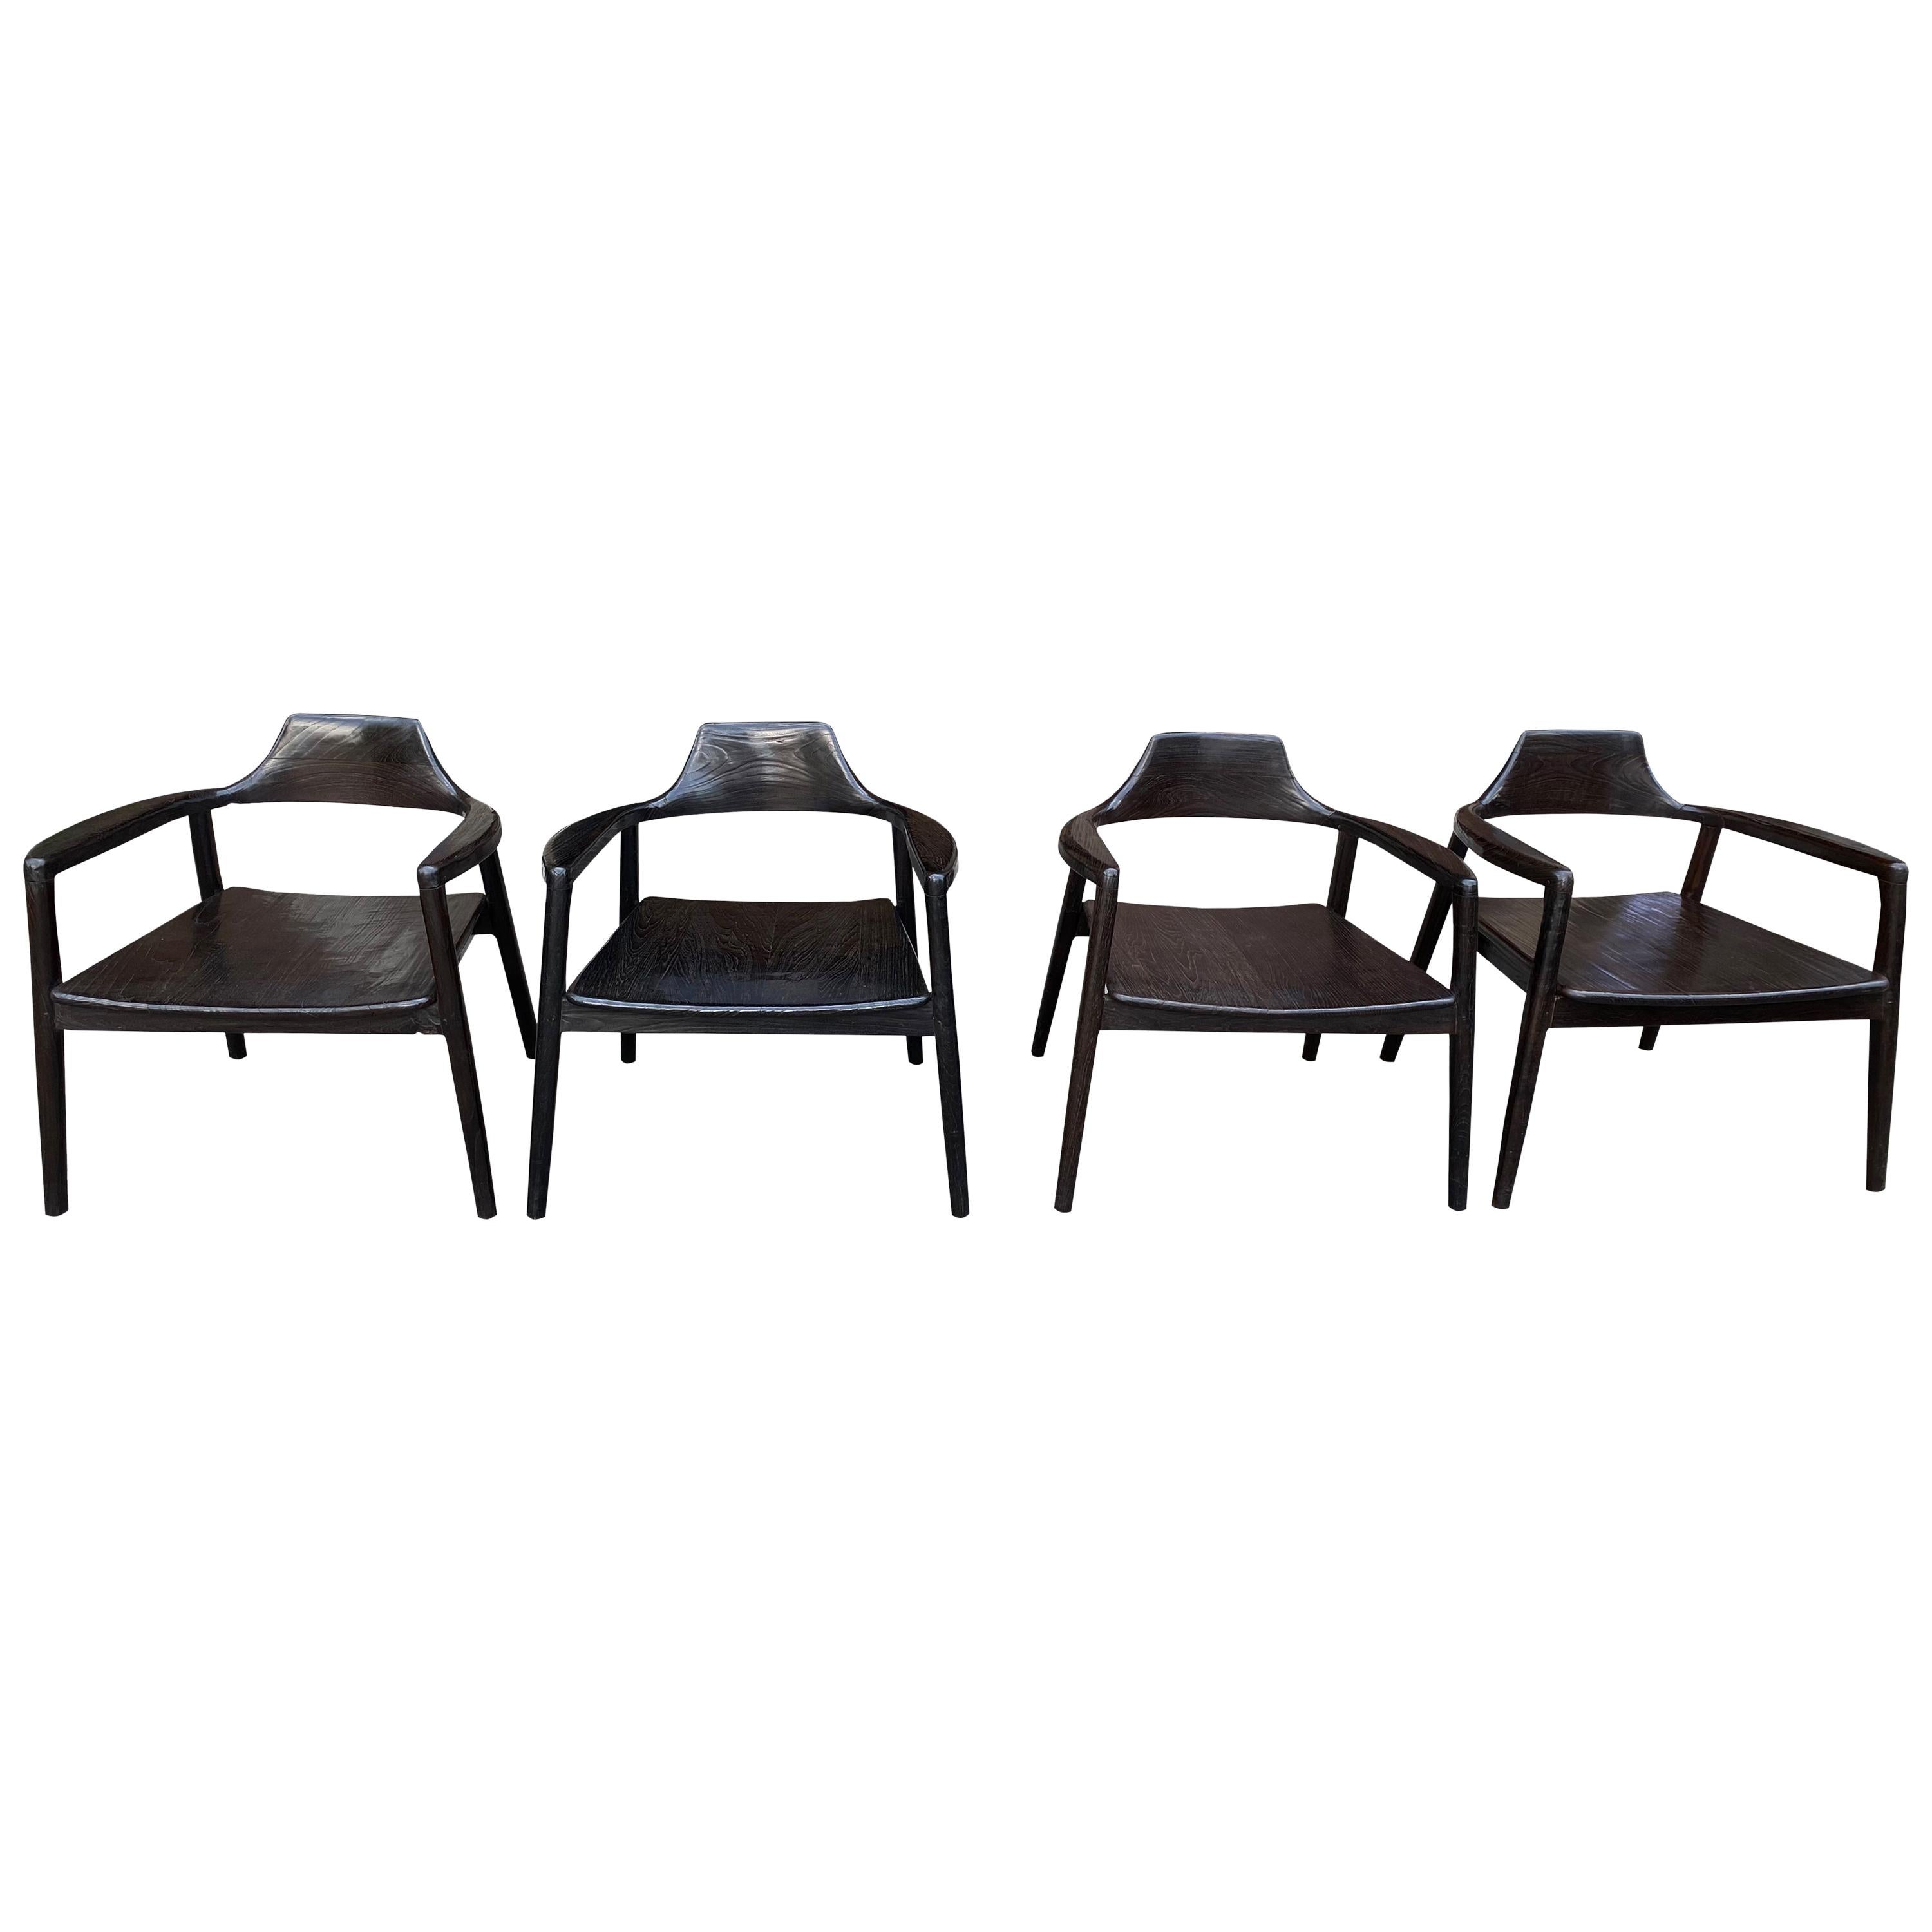 Andrianna Shamaris Midcentury Couture Set of Four Chairs